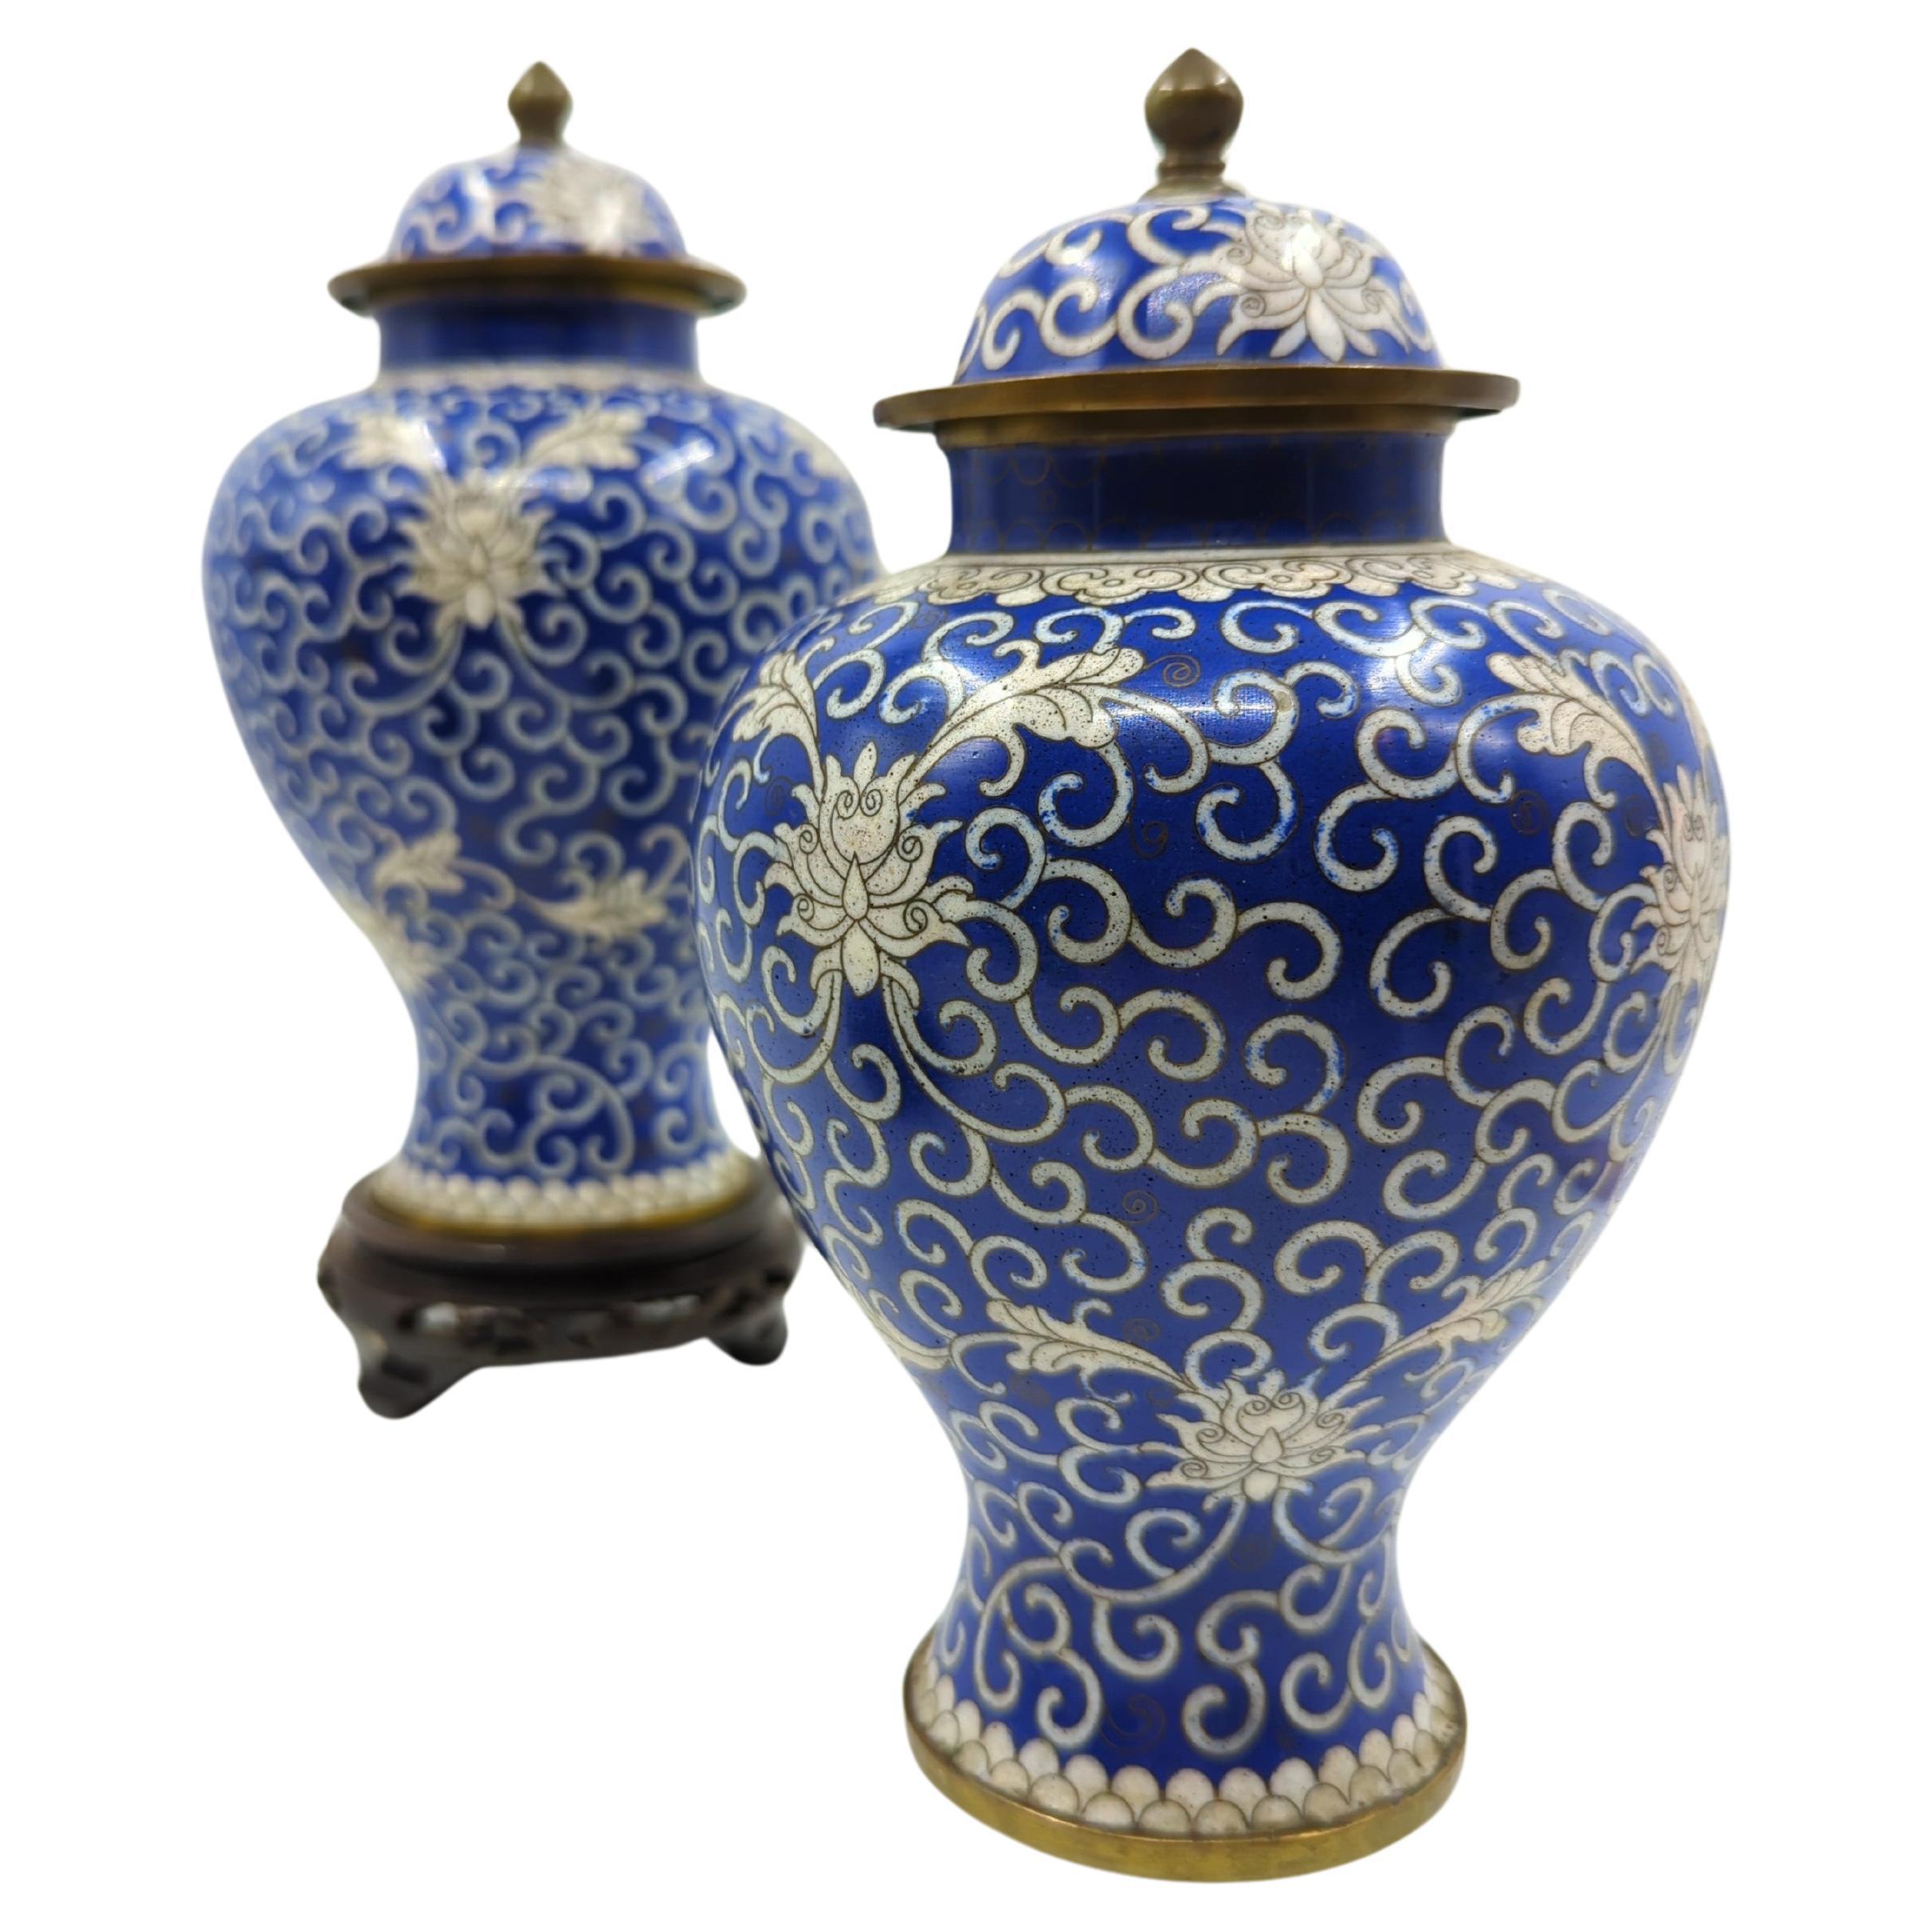 Chinese Export Antique Chinese Cloisonne Blue White General Jar Baluster Vase Garniture w Stand For Sale